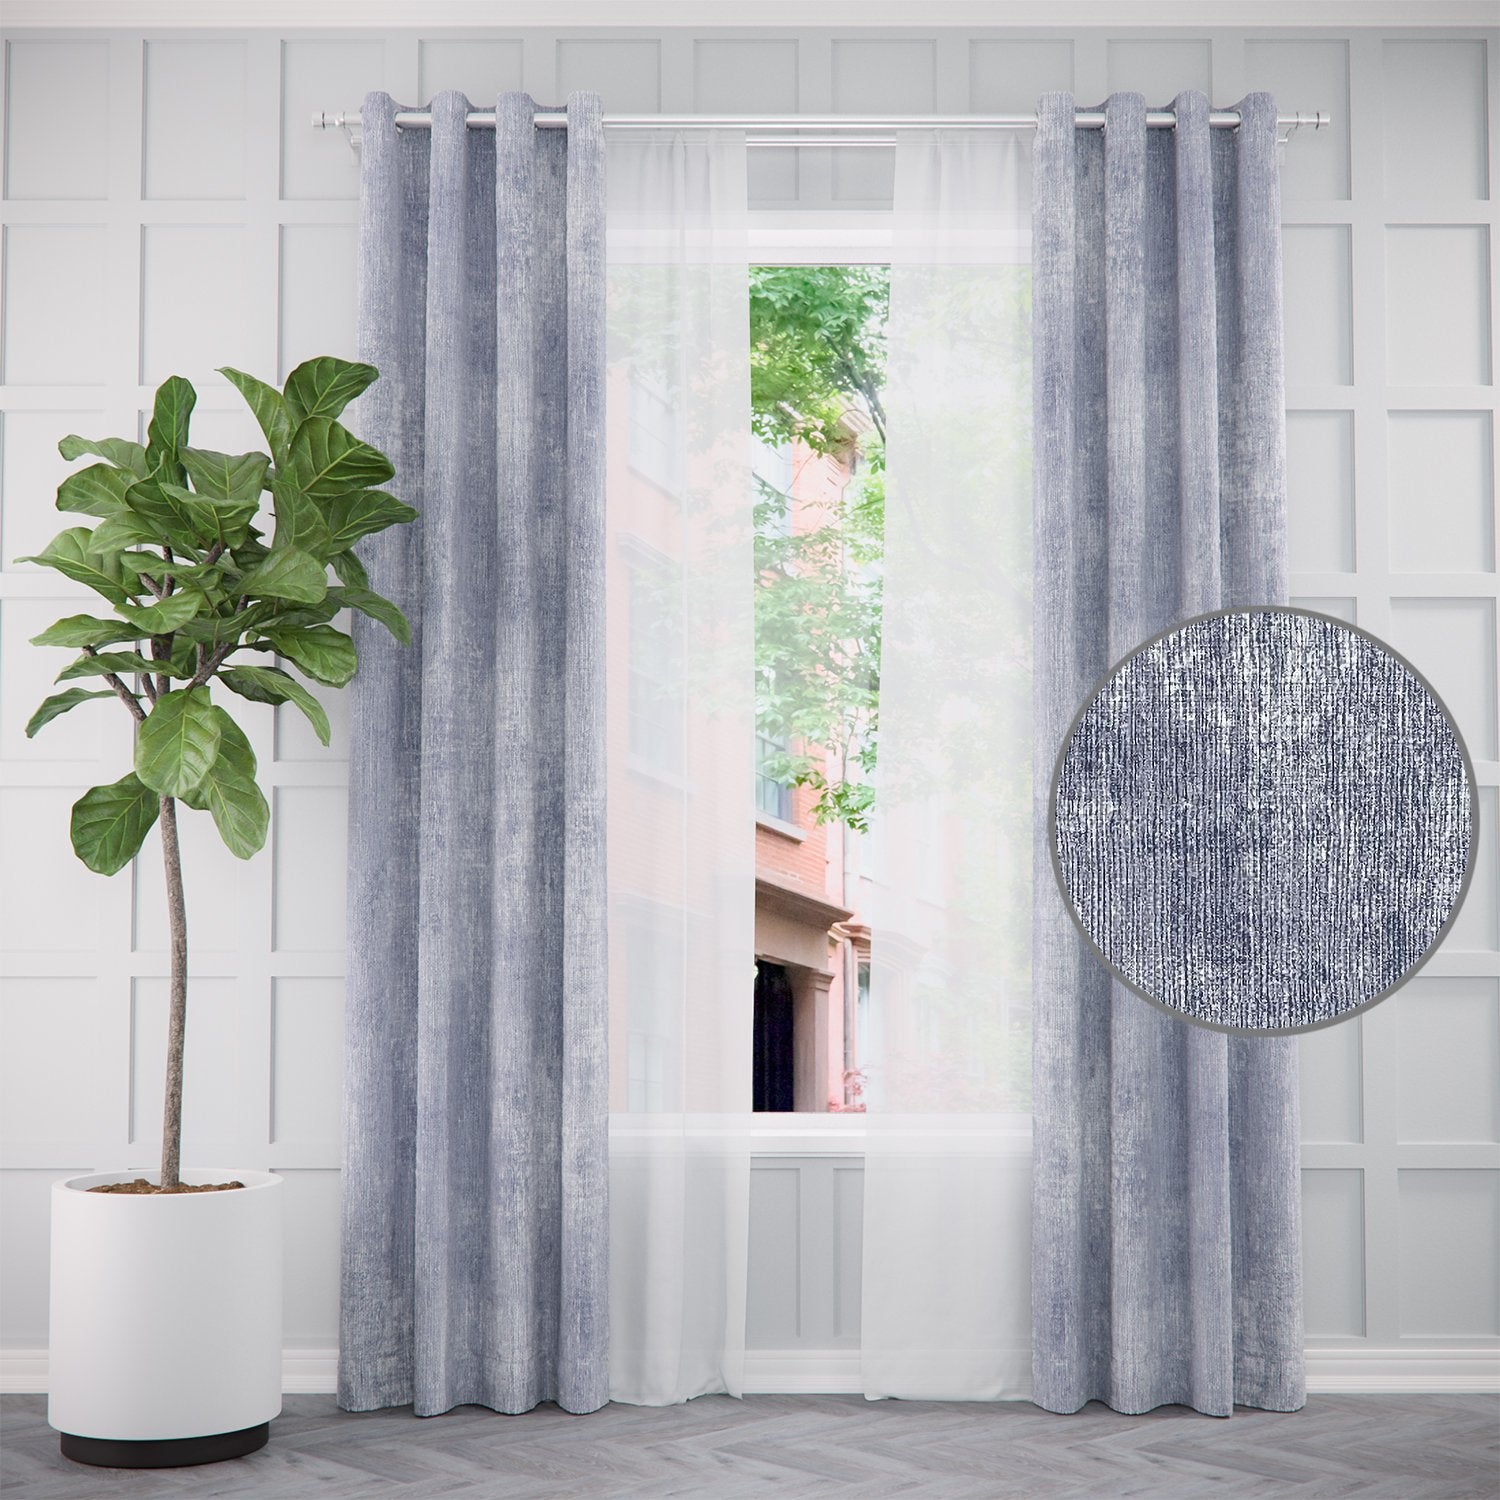 Pair of Urban Luster Abstract Curtains and Pair of Sheers